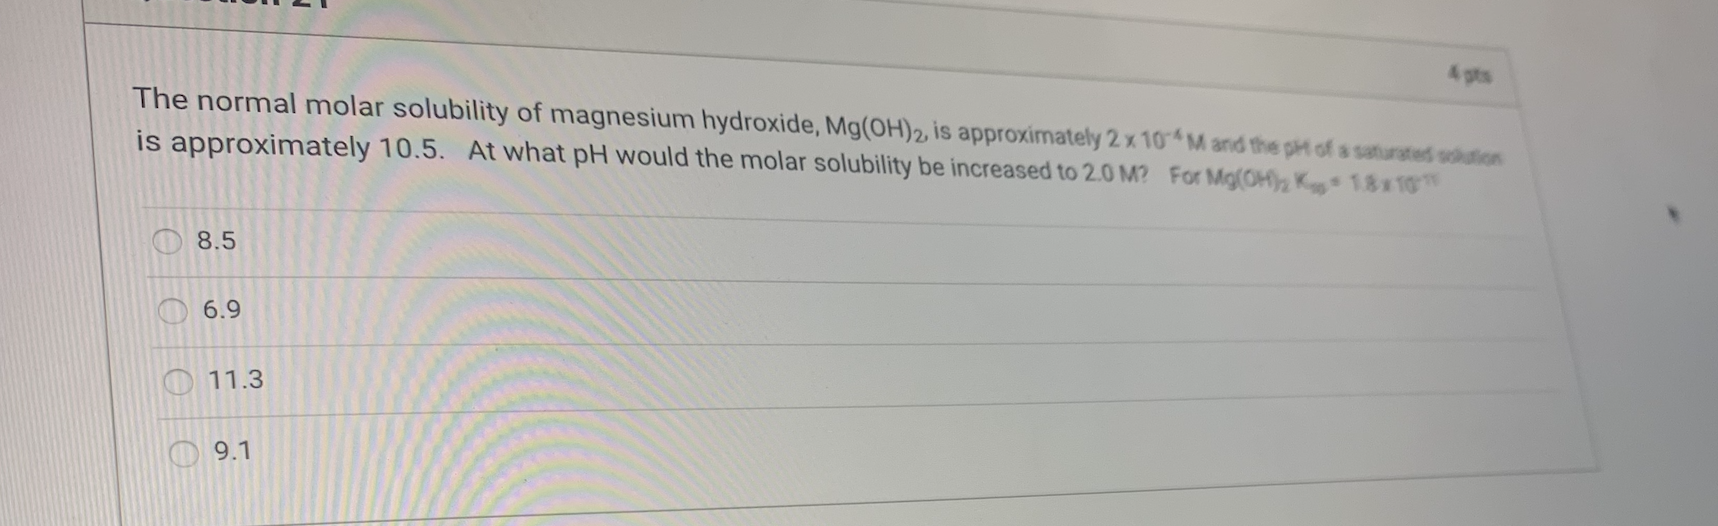 Solved The normal molar solubility of magnesium hydroxide, | Chegg.com